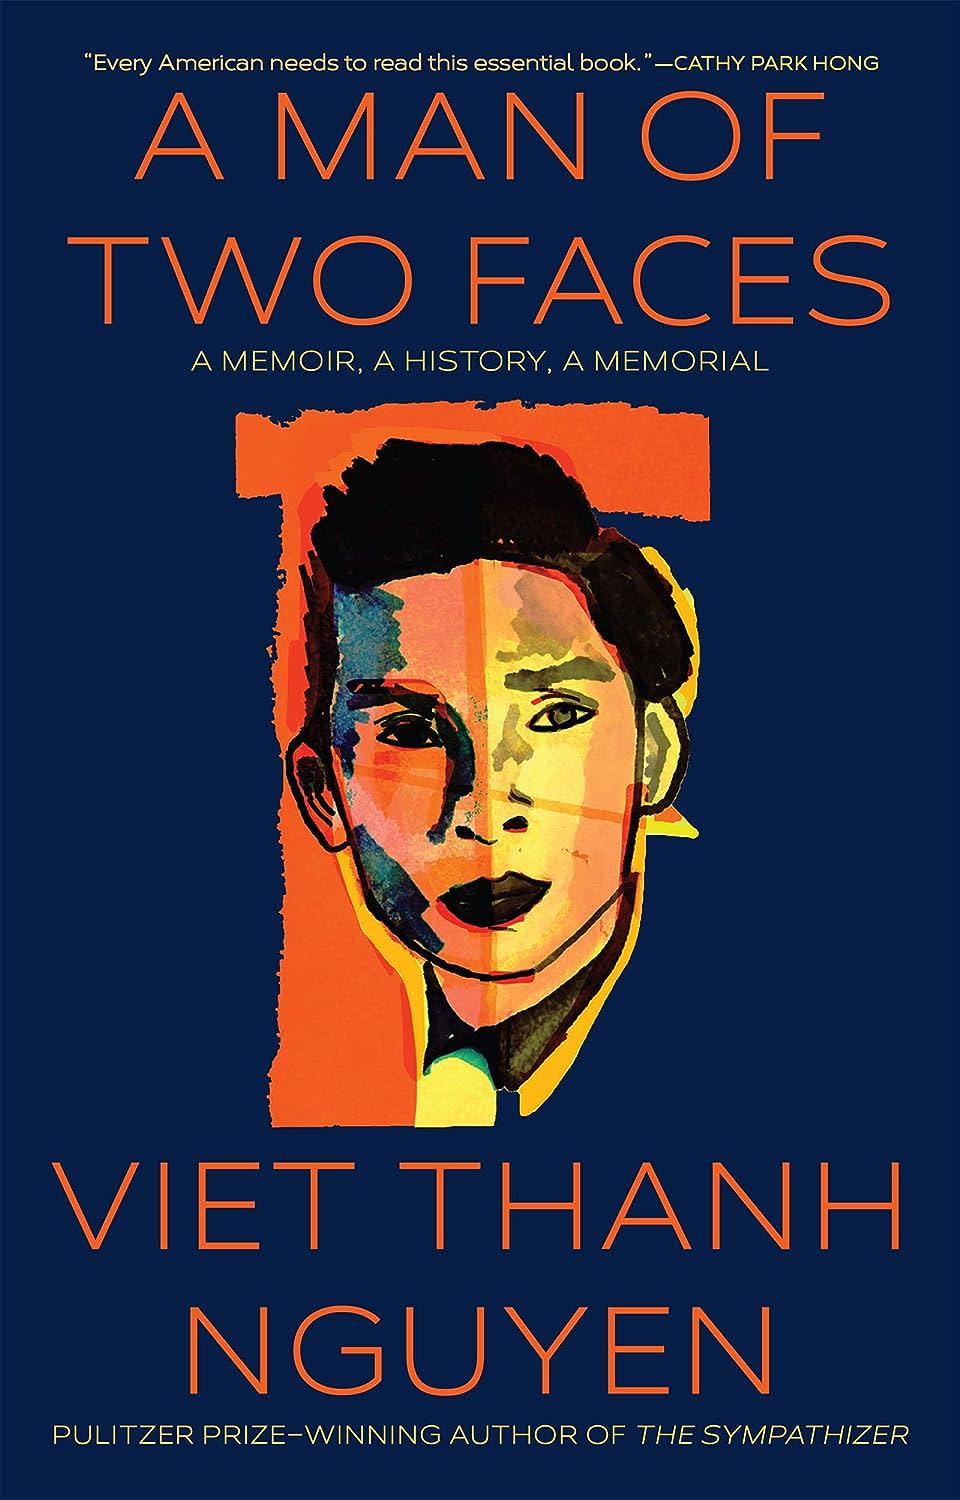 ‘A Man of Two Faces’ by Viet Thanh Nguyen